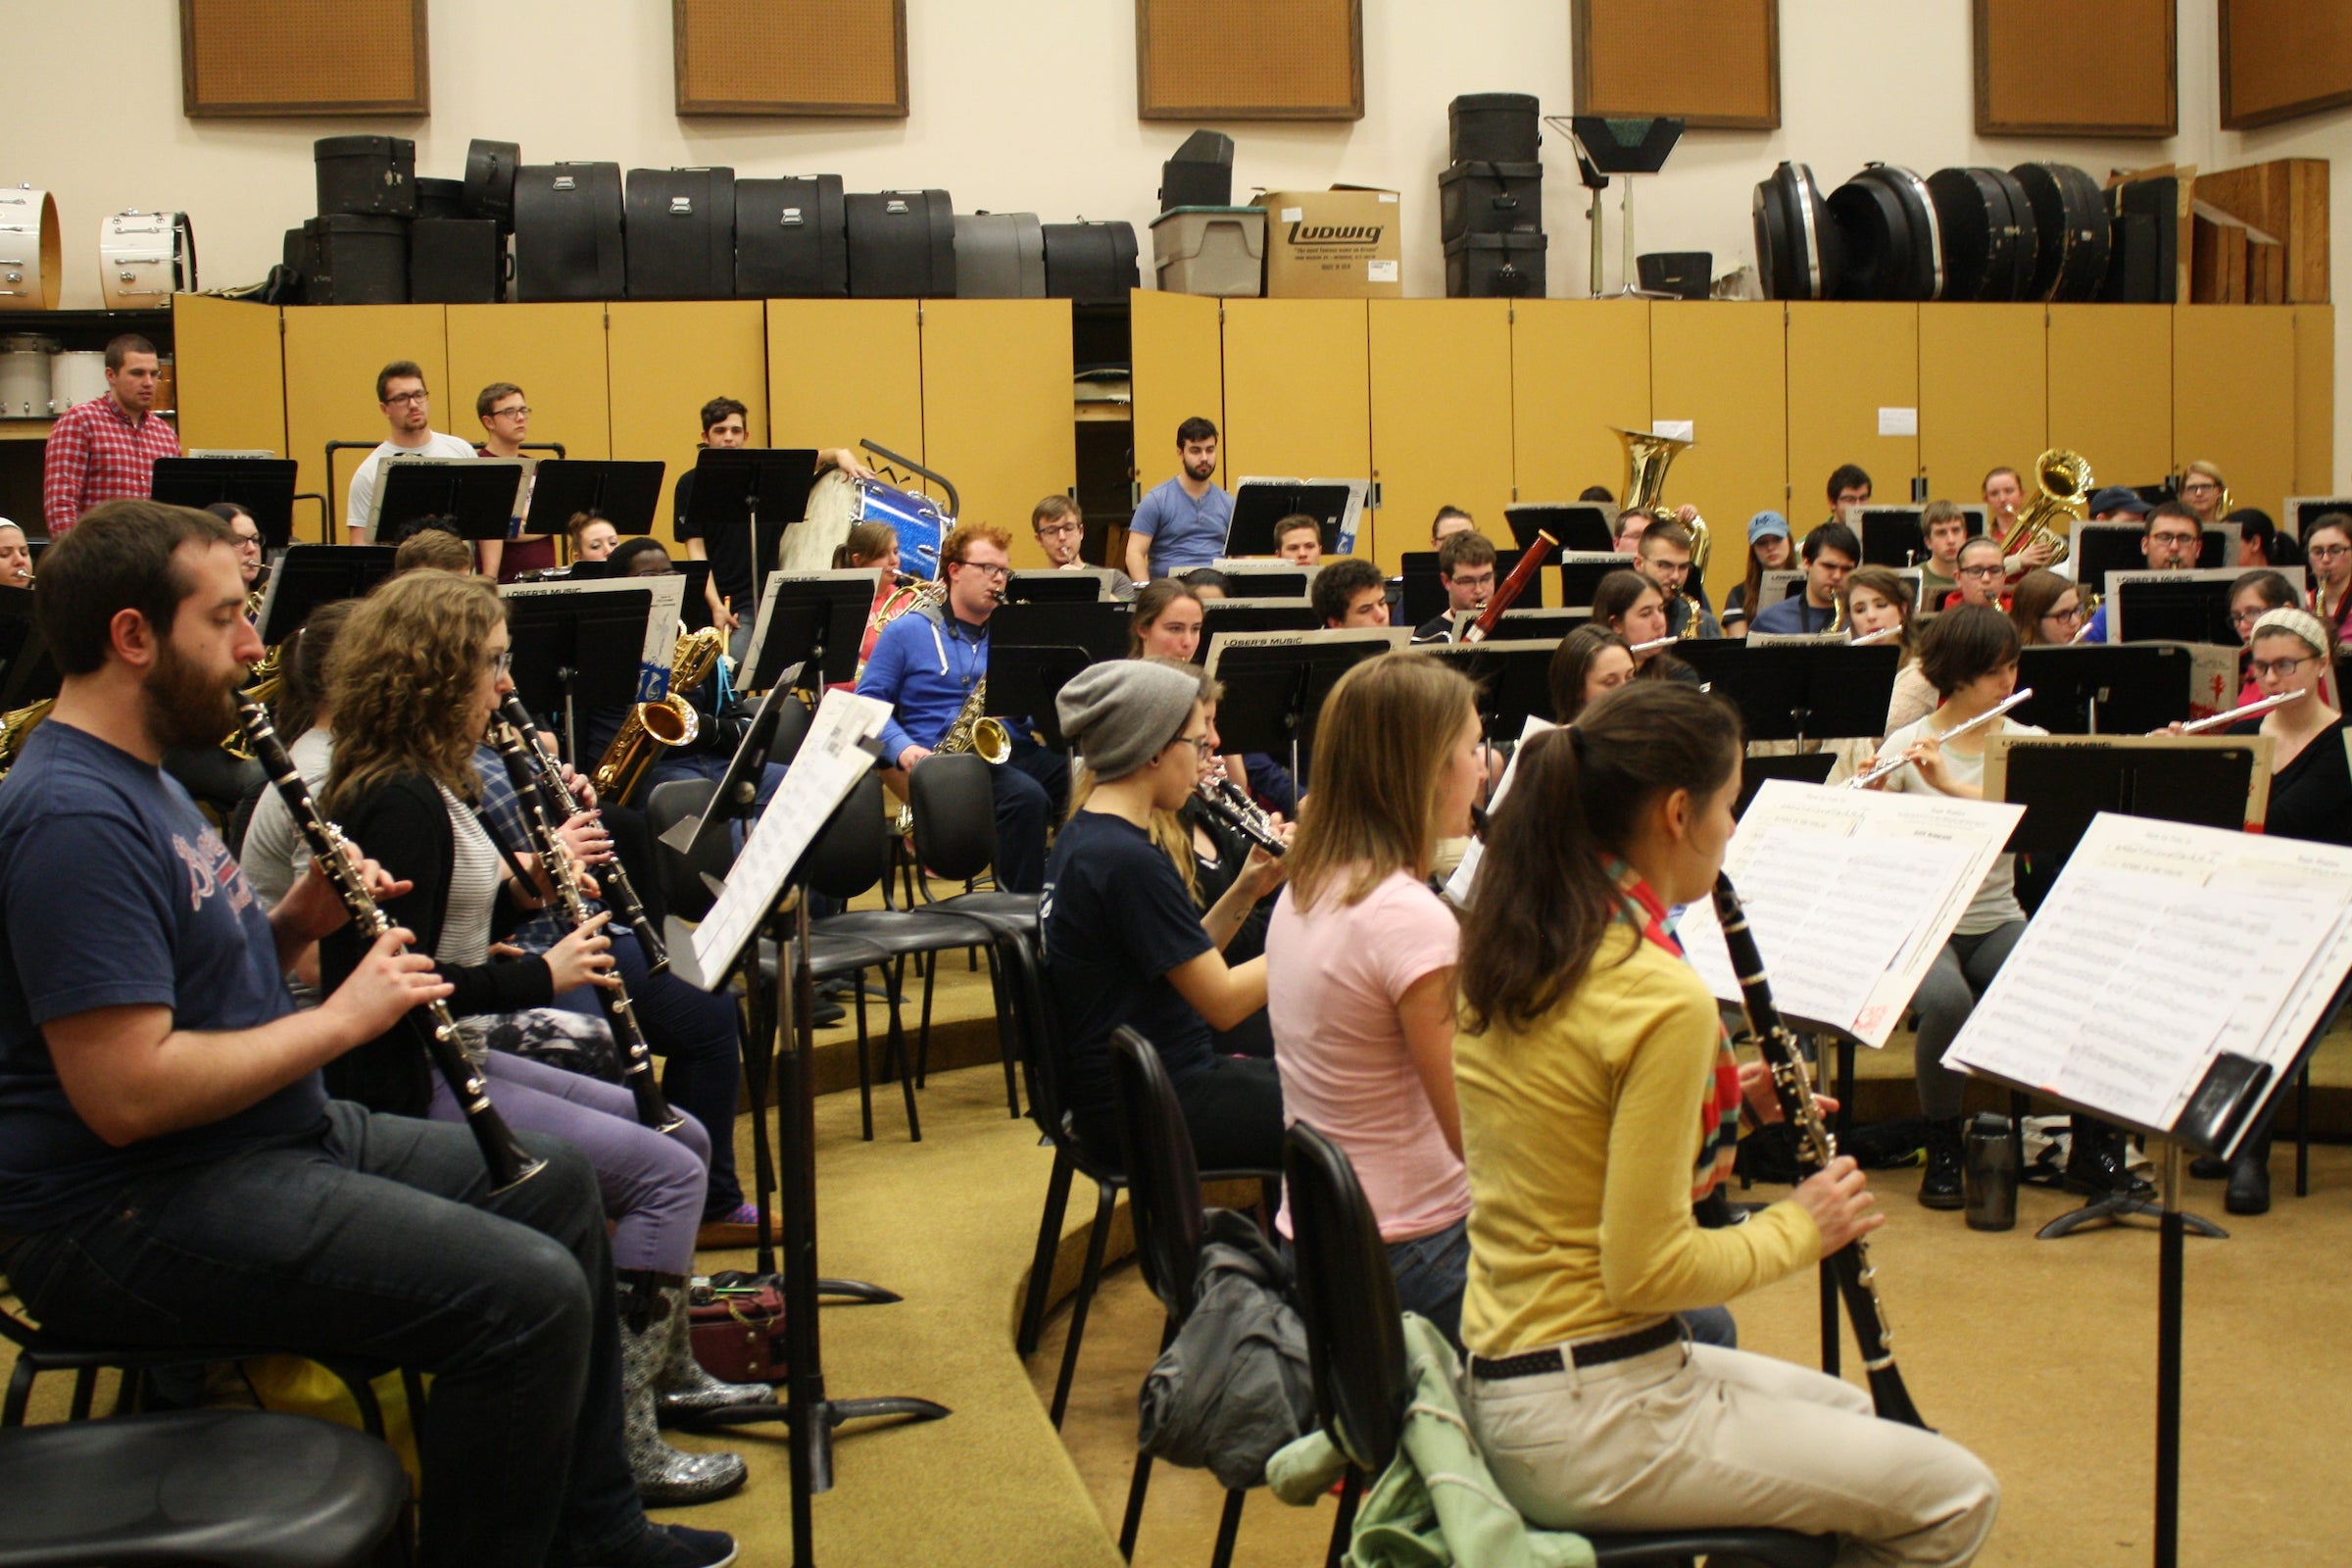 Symphonic band plays during lesson